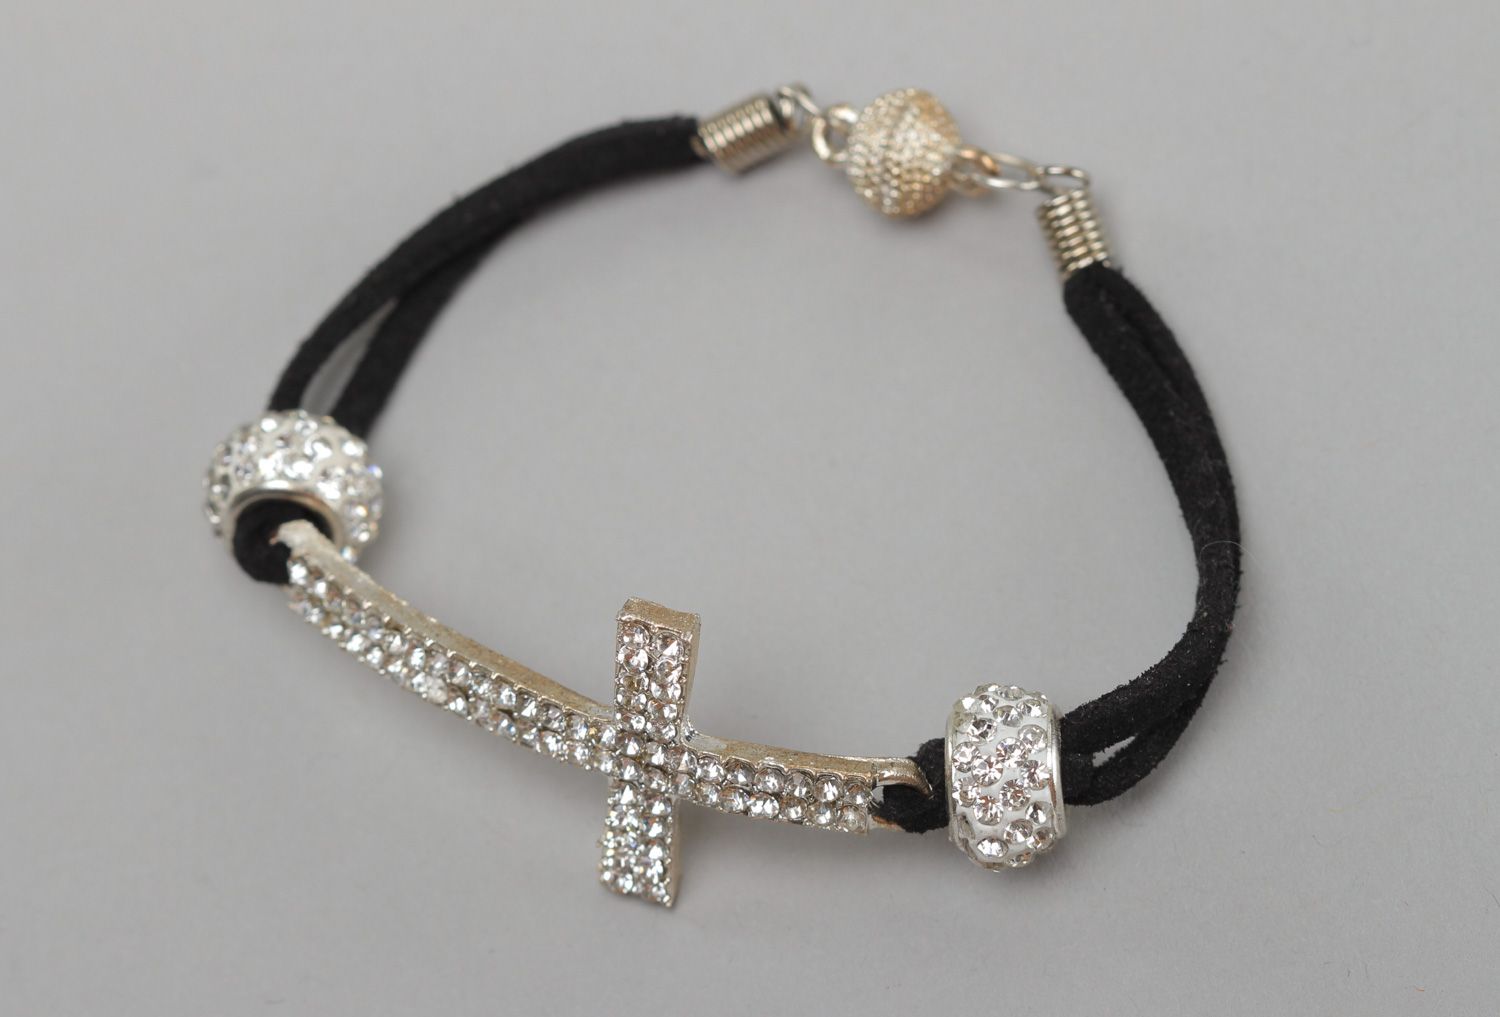 Black handmade artificial suede wrist bracelet with cross charm and strasses for girls photo 2